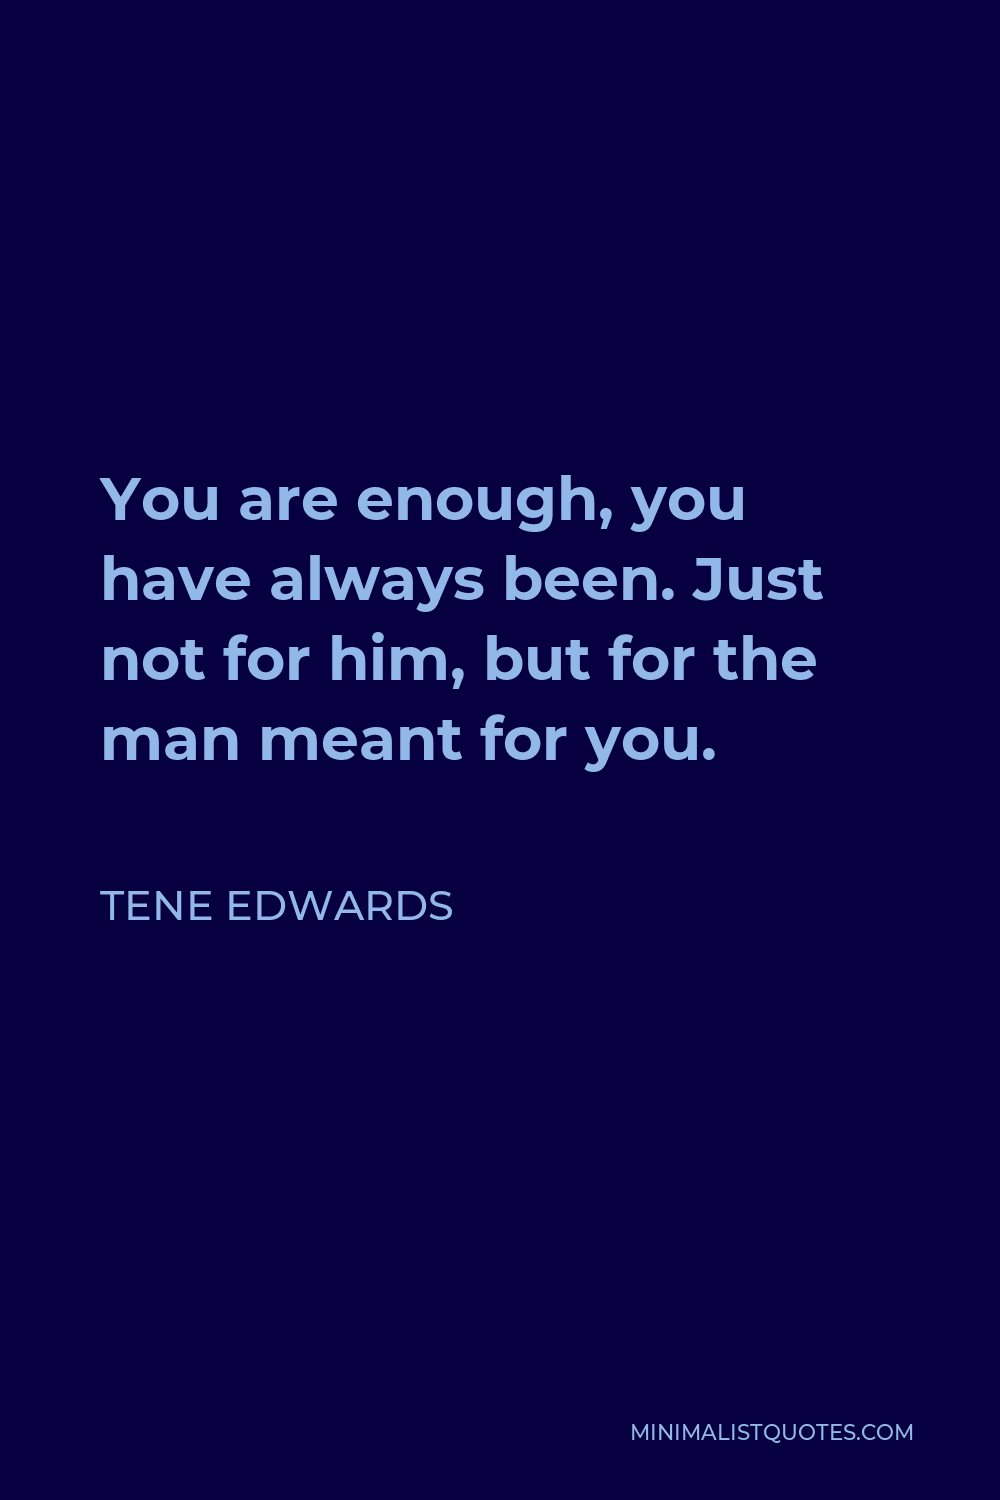 Tene Edwards Quote - You are enough, you have always been. Just not for him, but for the man meant for you.